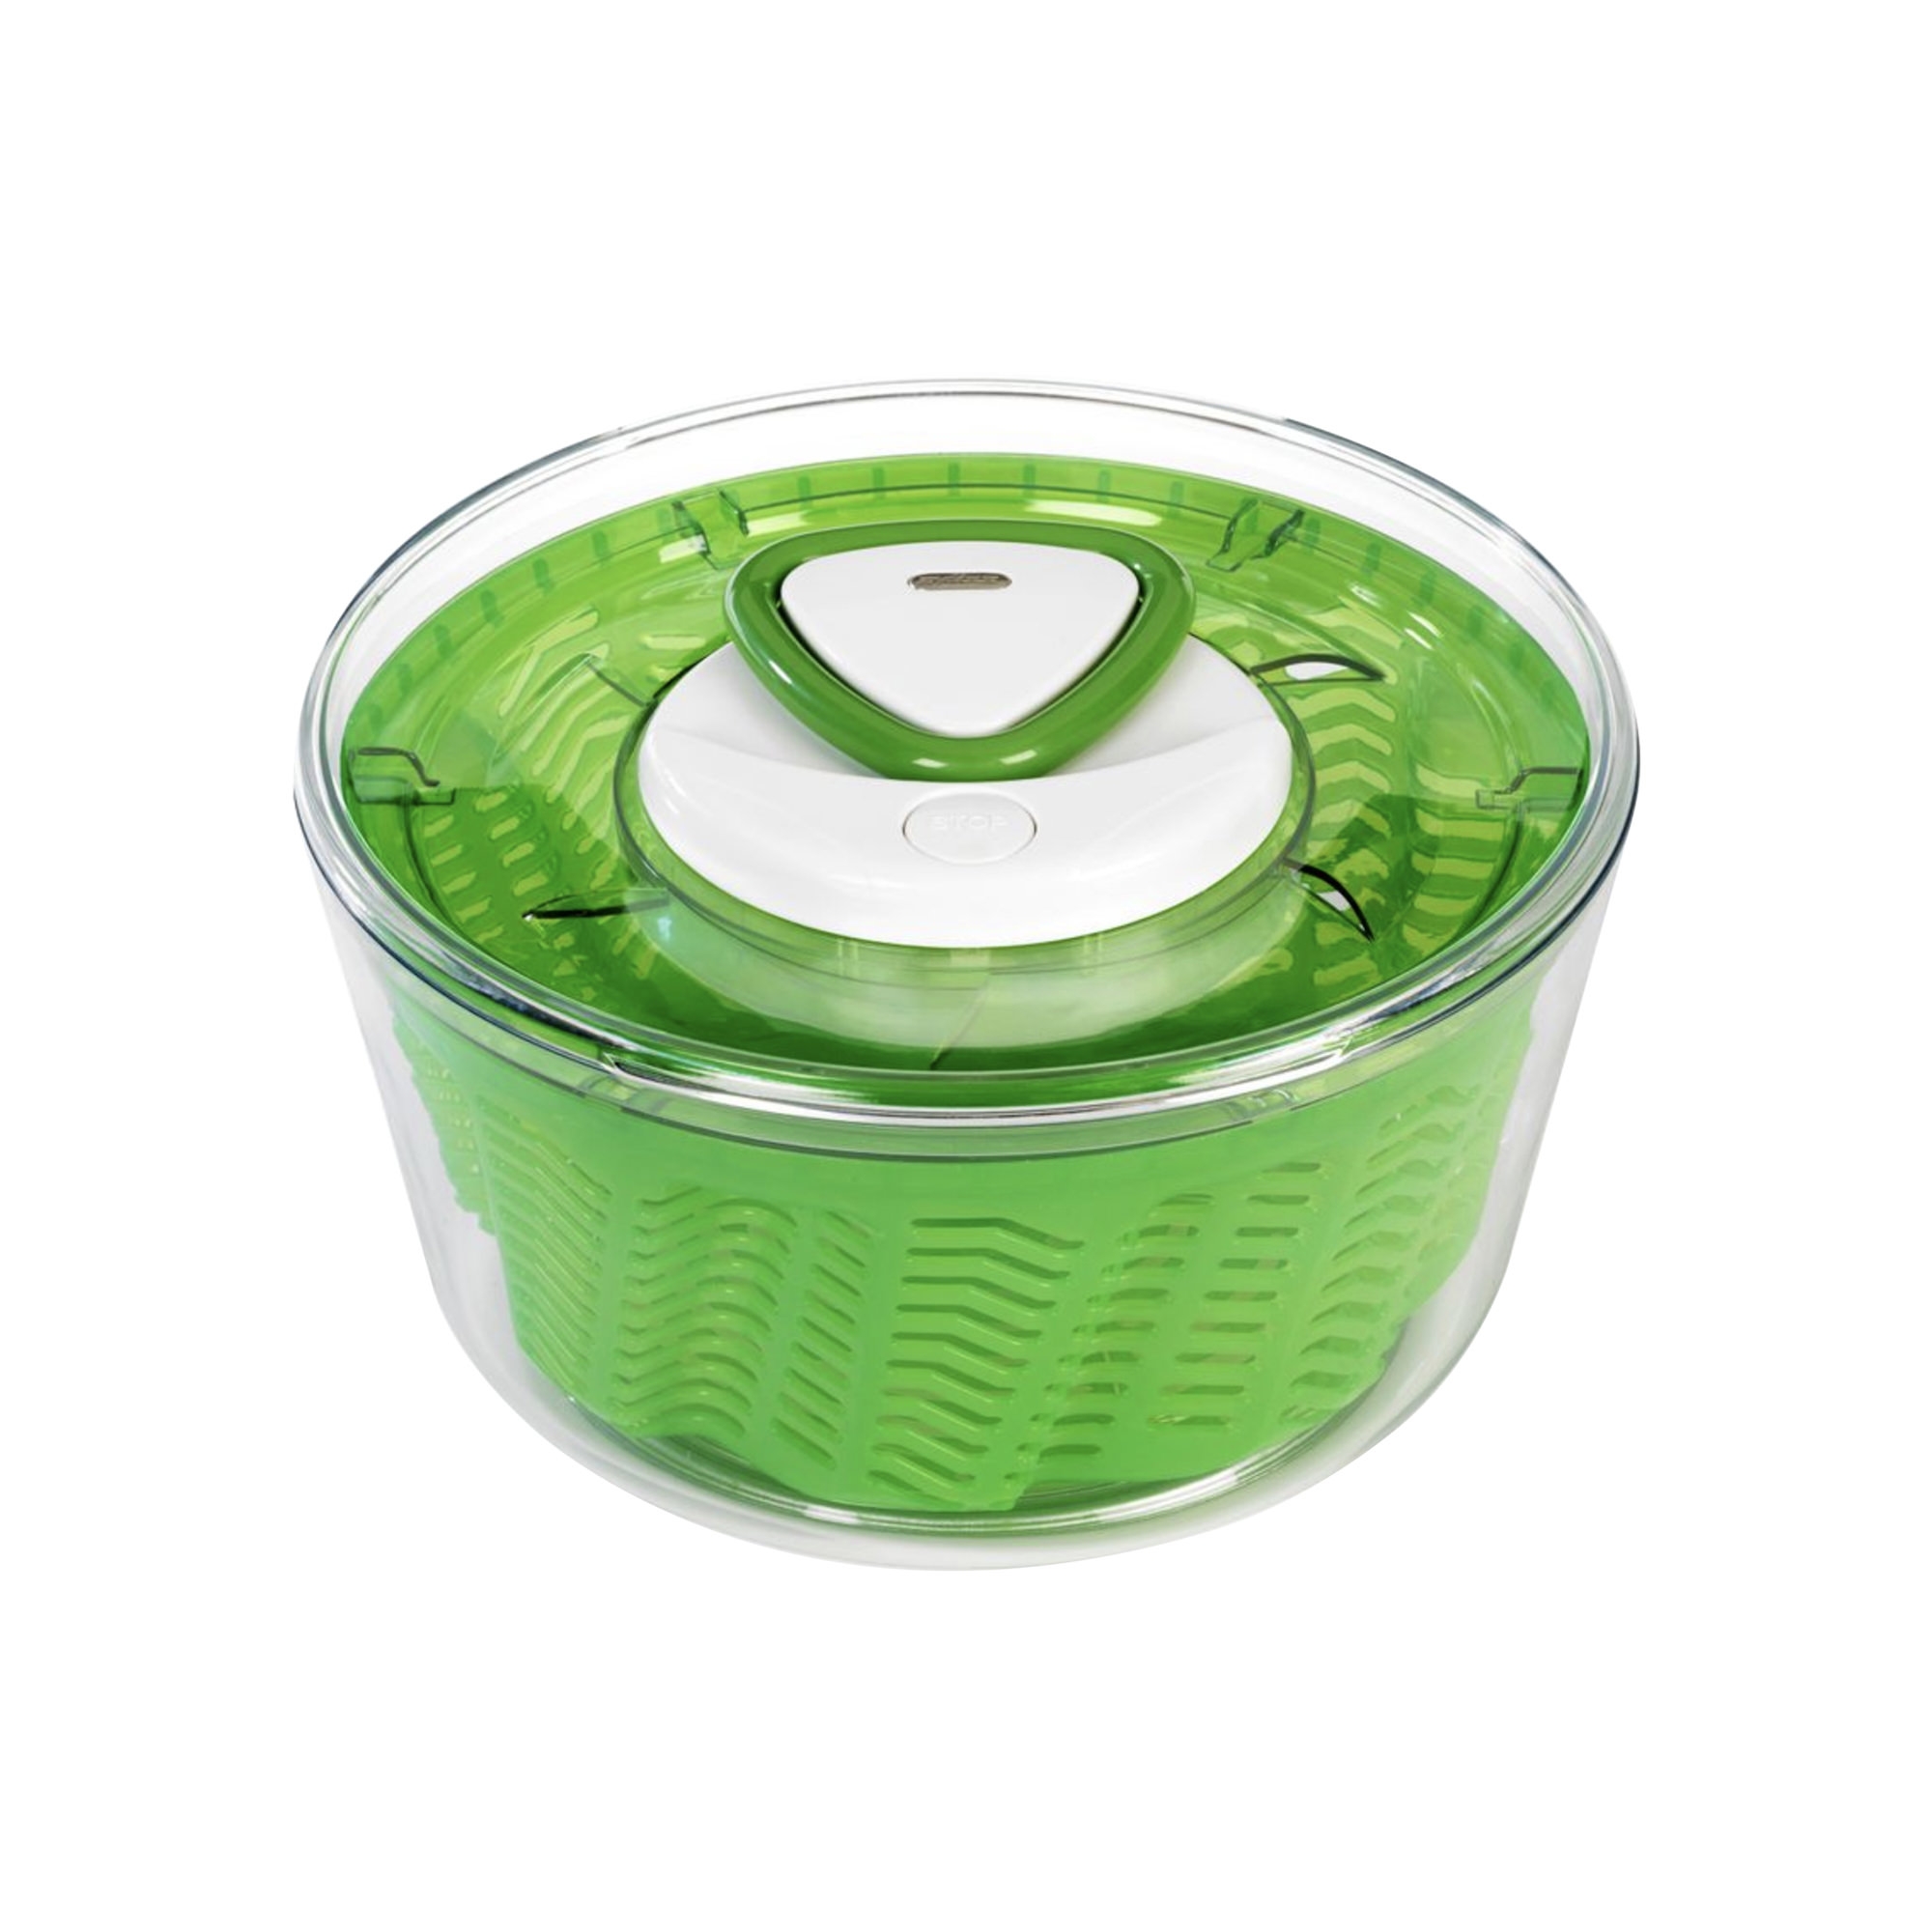 Zyliss Easy Spin 2 Salad Spinner Small Green Image 1